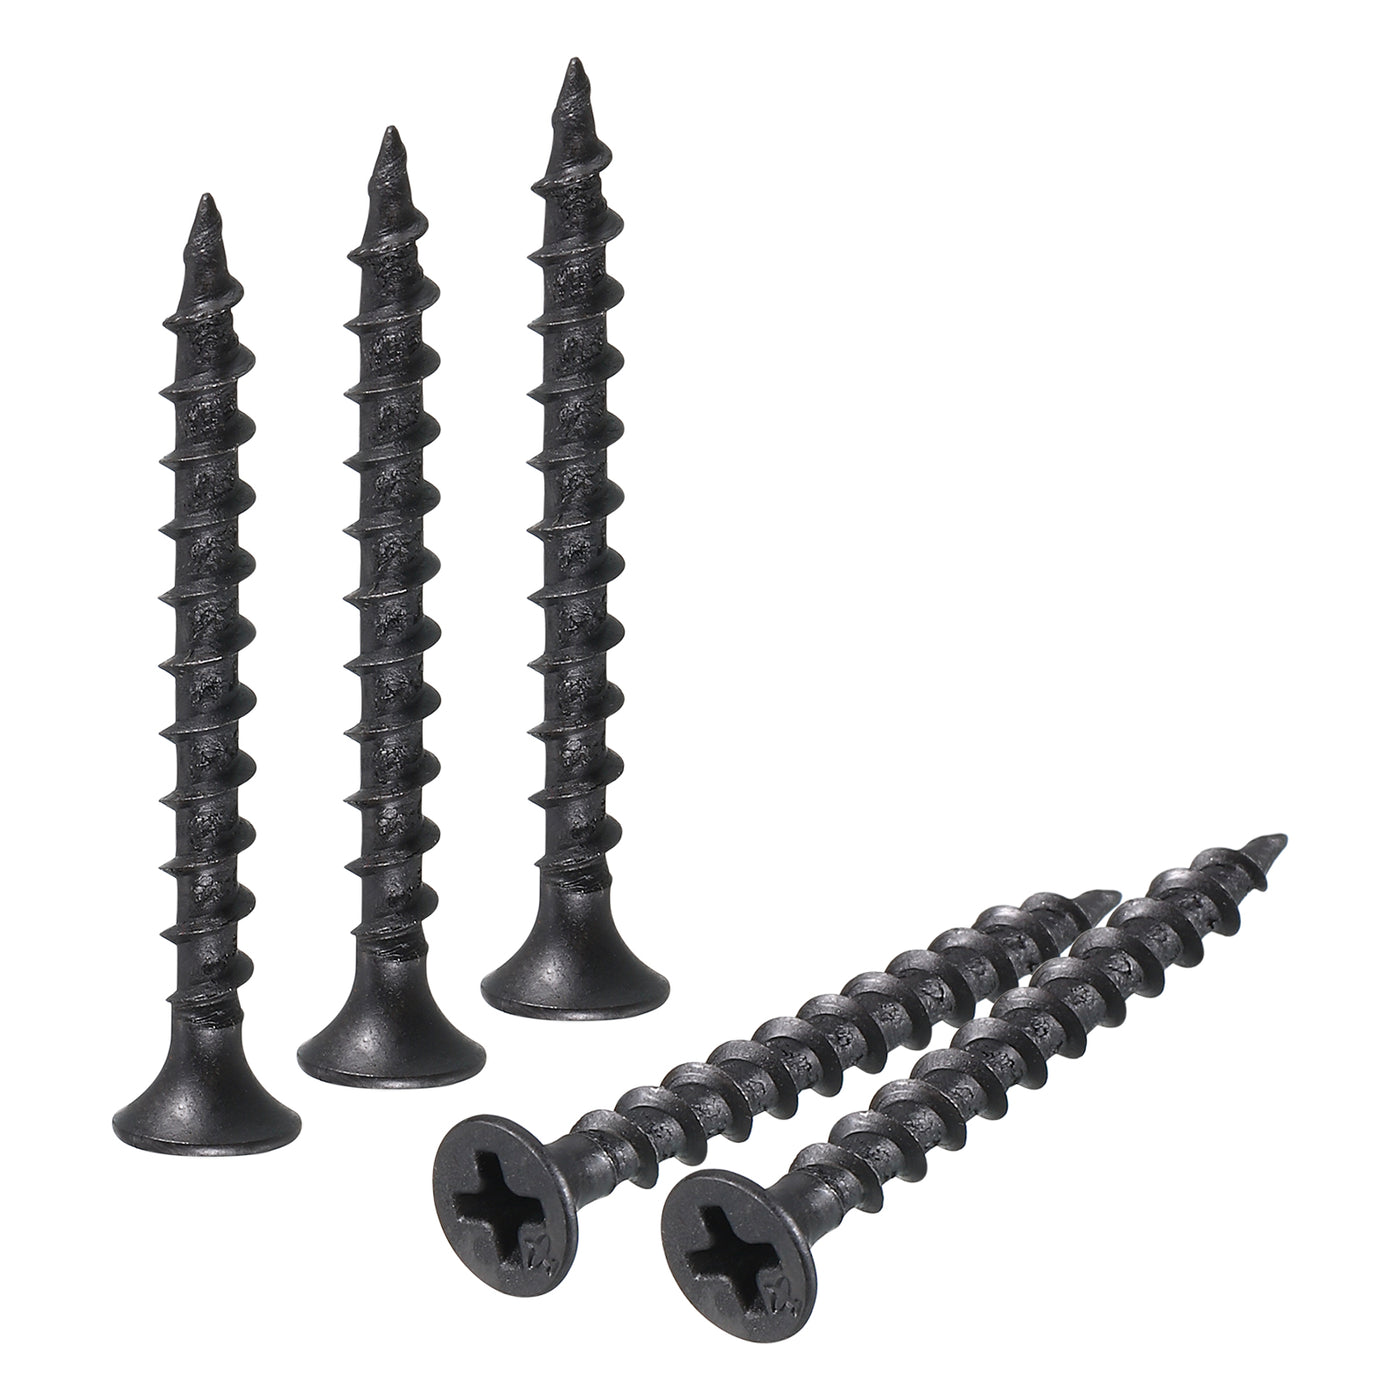 uxcell Uxcell M3.8x40mm 100pcs Phillips Drive Wood Screws, Carbon Steel Self Tapping Screws